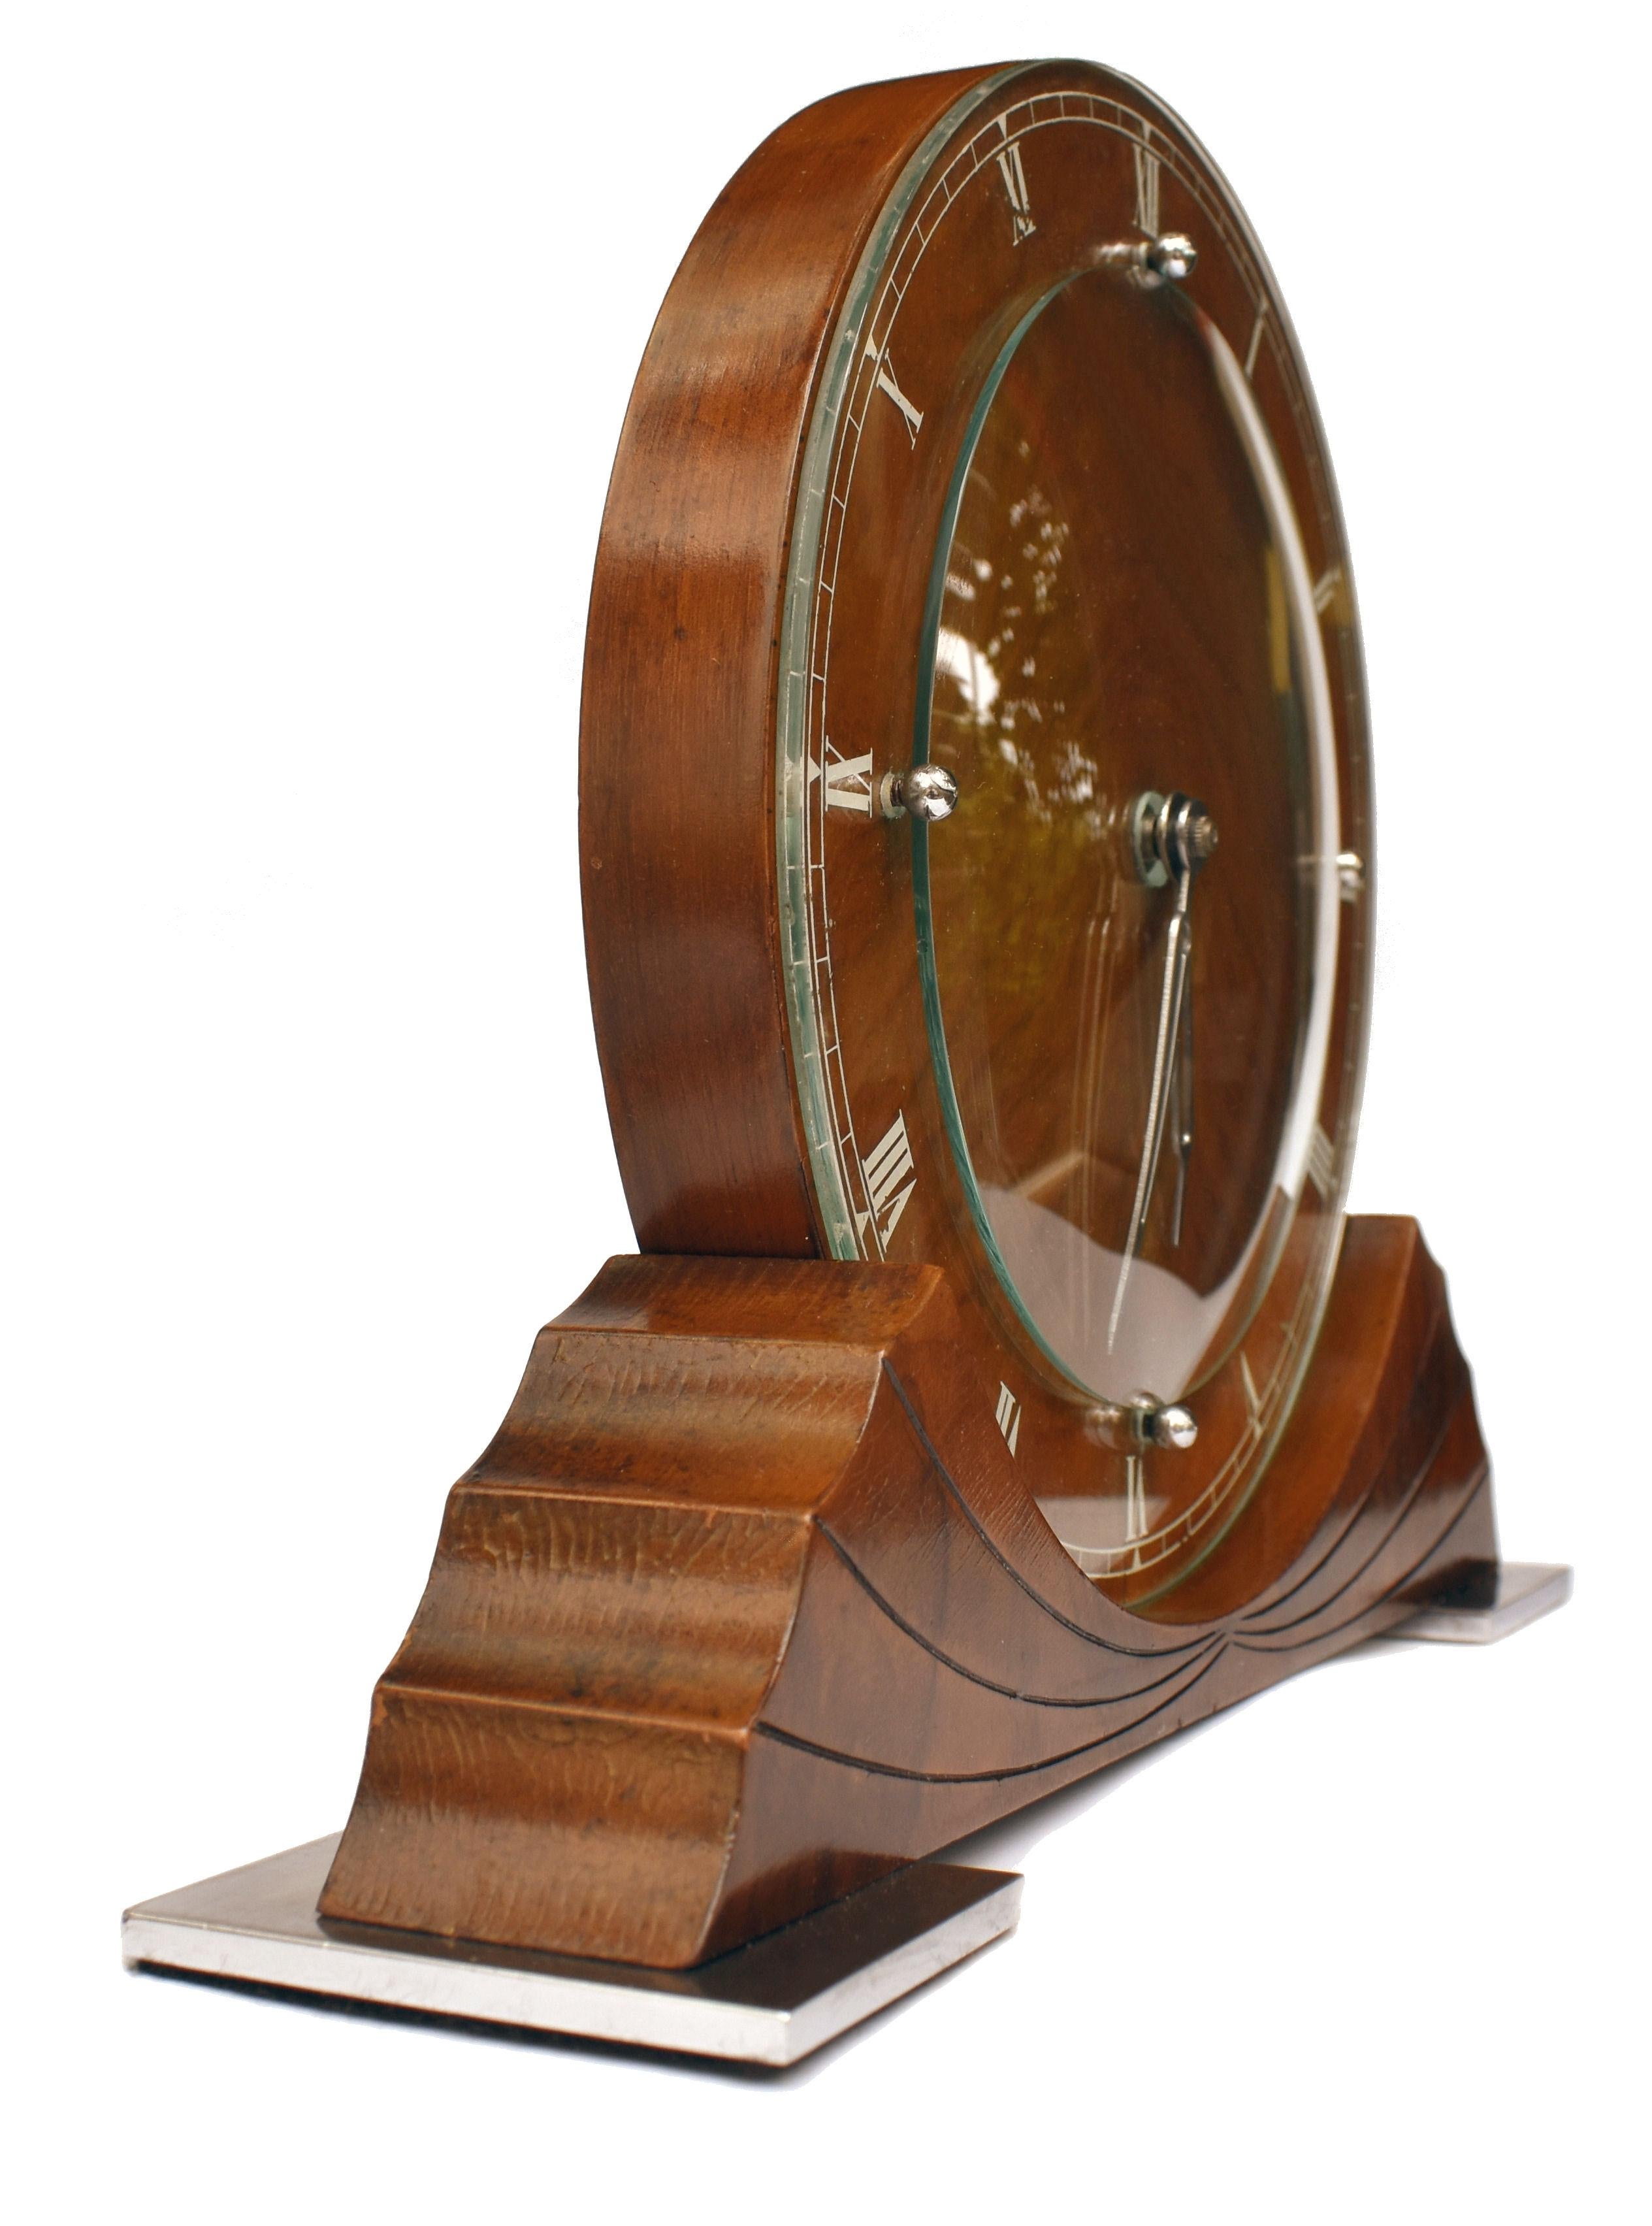 For your consideration is this super stylish Art Deco Wood and Glass Ferranti Synchronous Mantle Clock With Working Original Movement, dating to 1938. A rare example of it's type, this Ferranti (1932 - 1957 Manchester, UK) clock was made circa 1938,